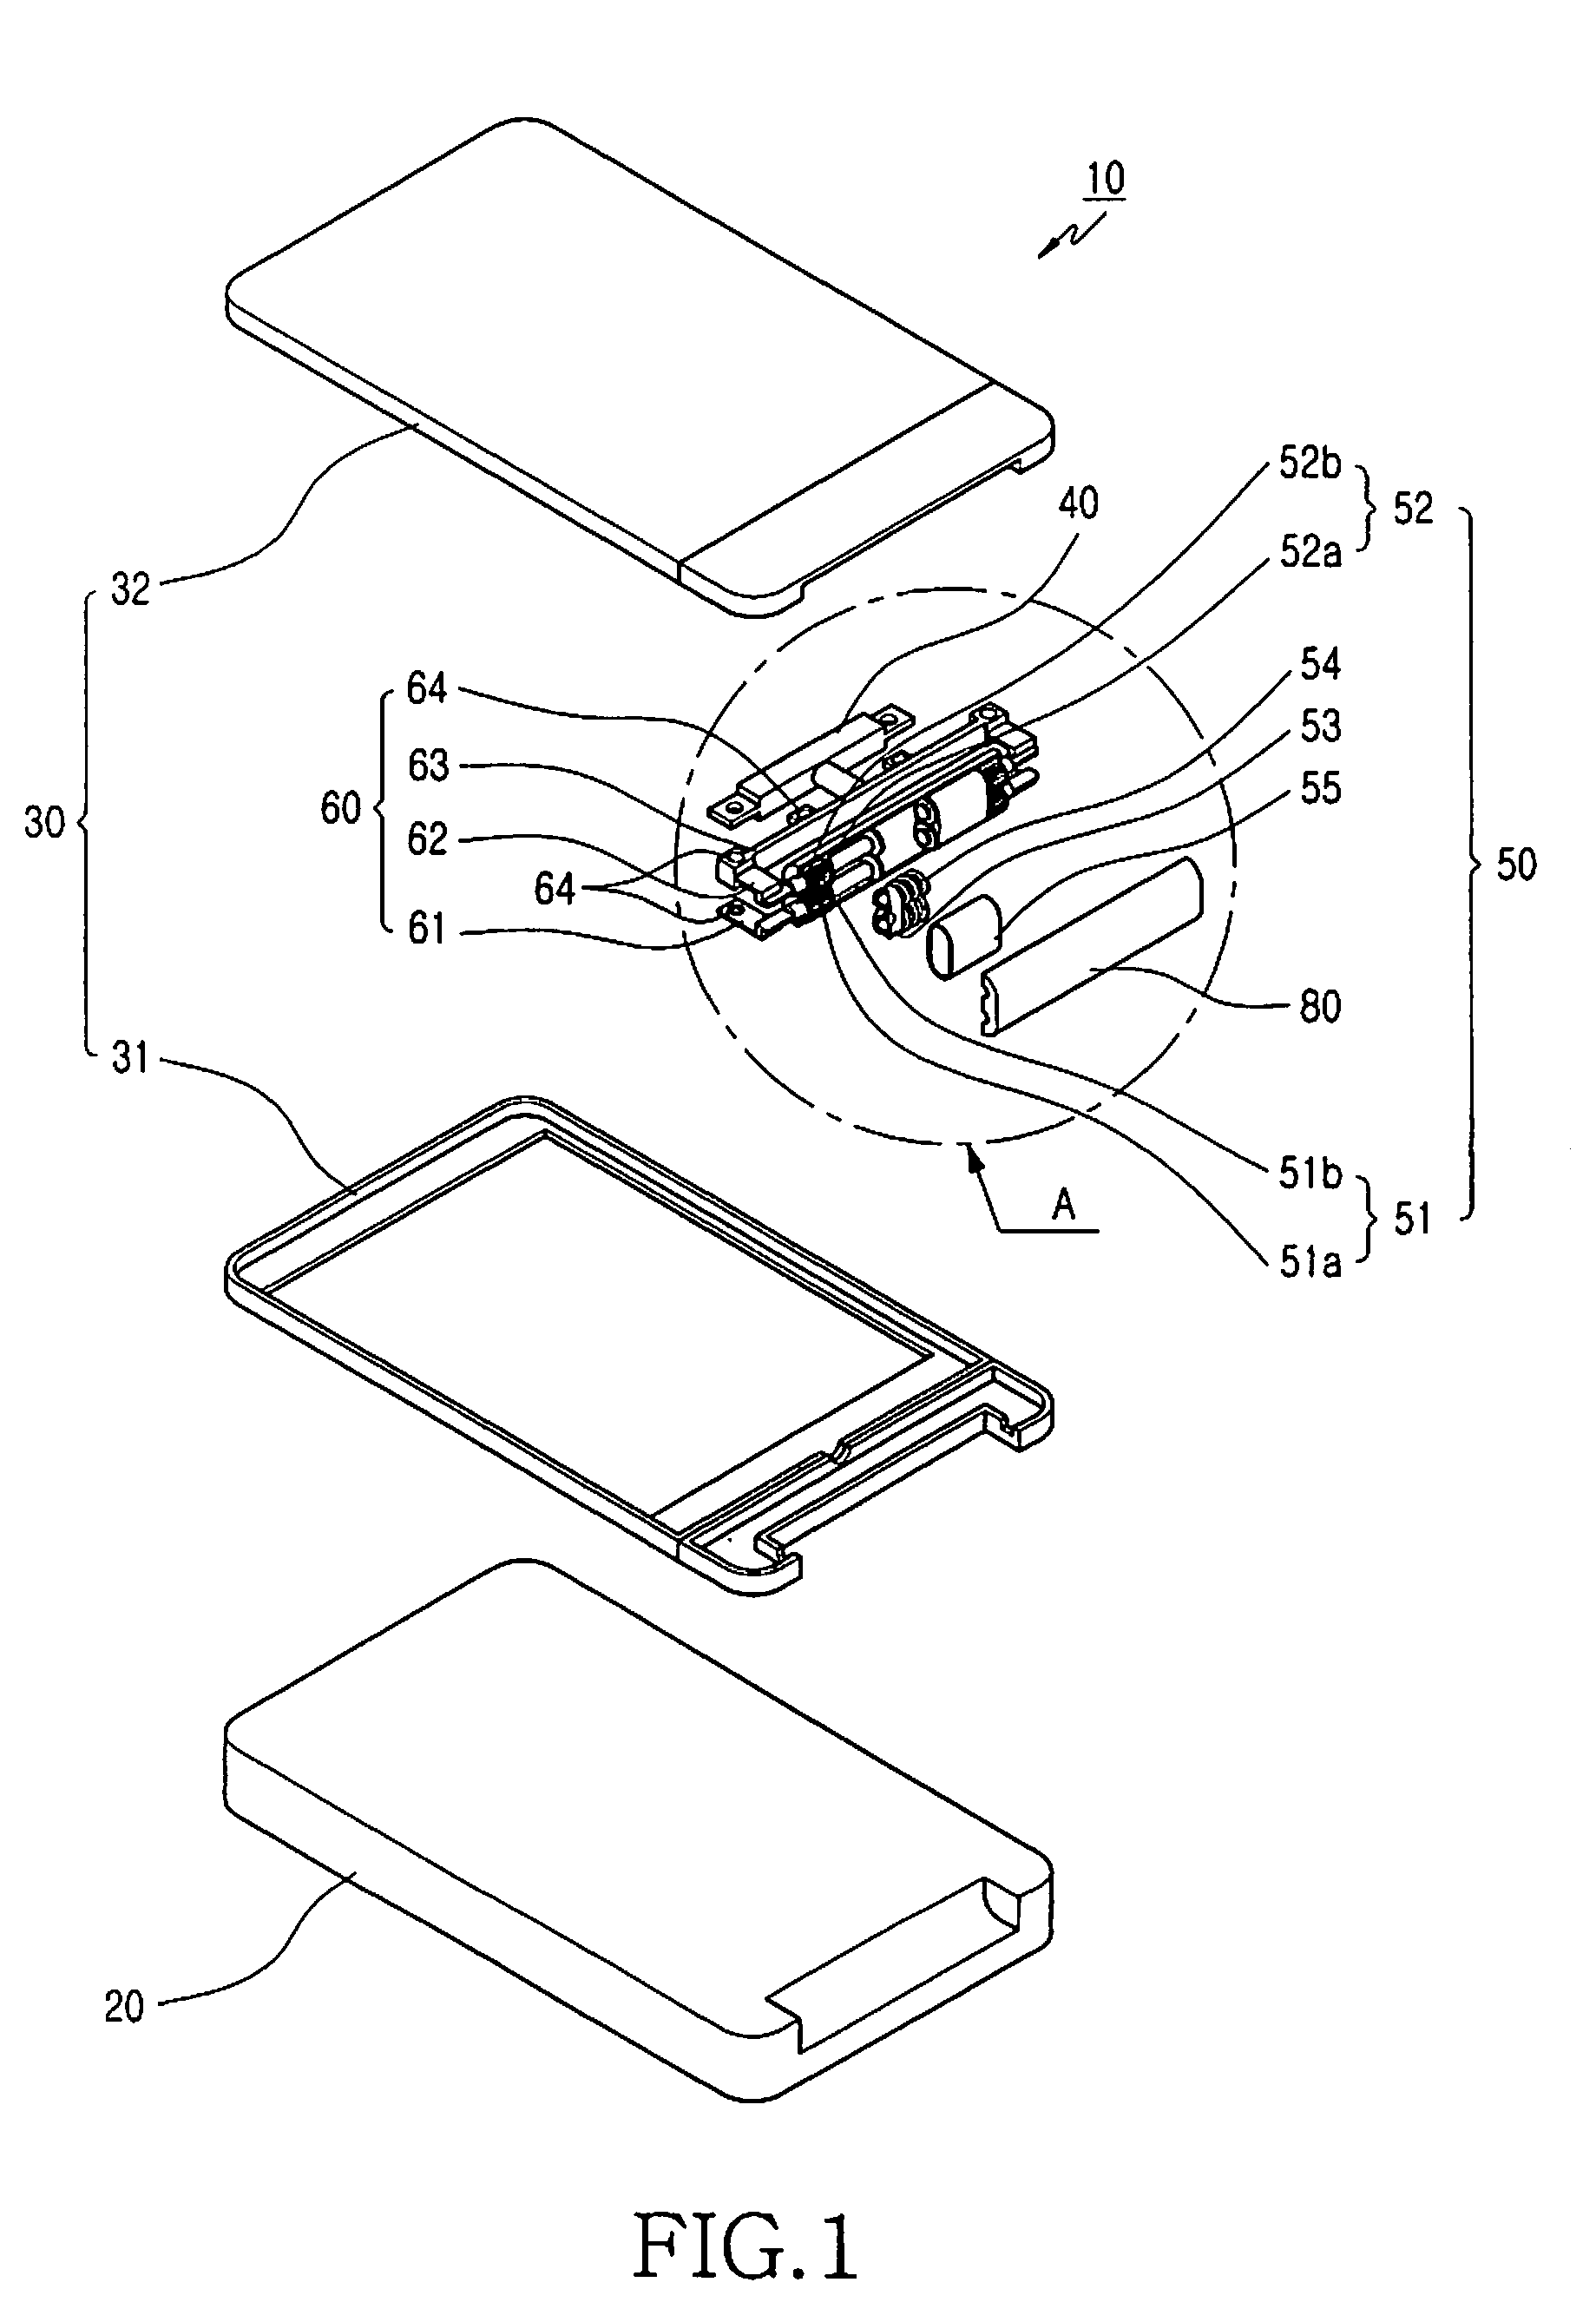 Hinge apparatus for portable communication device